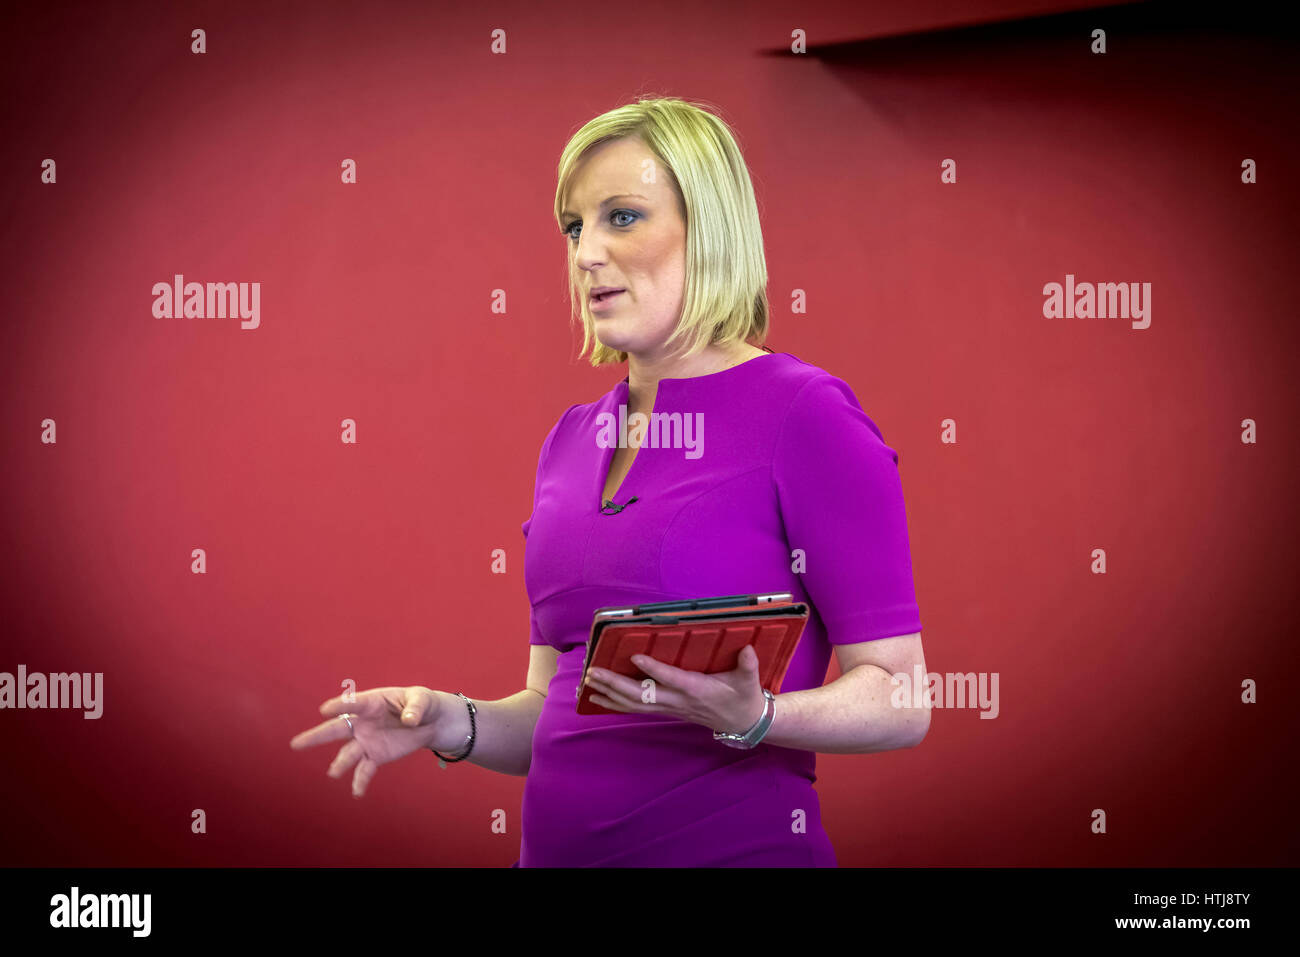 TV personality Steph McGovern Currently appearing with Alex Jones on BBC1 TV. Stock Photo